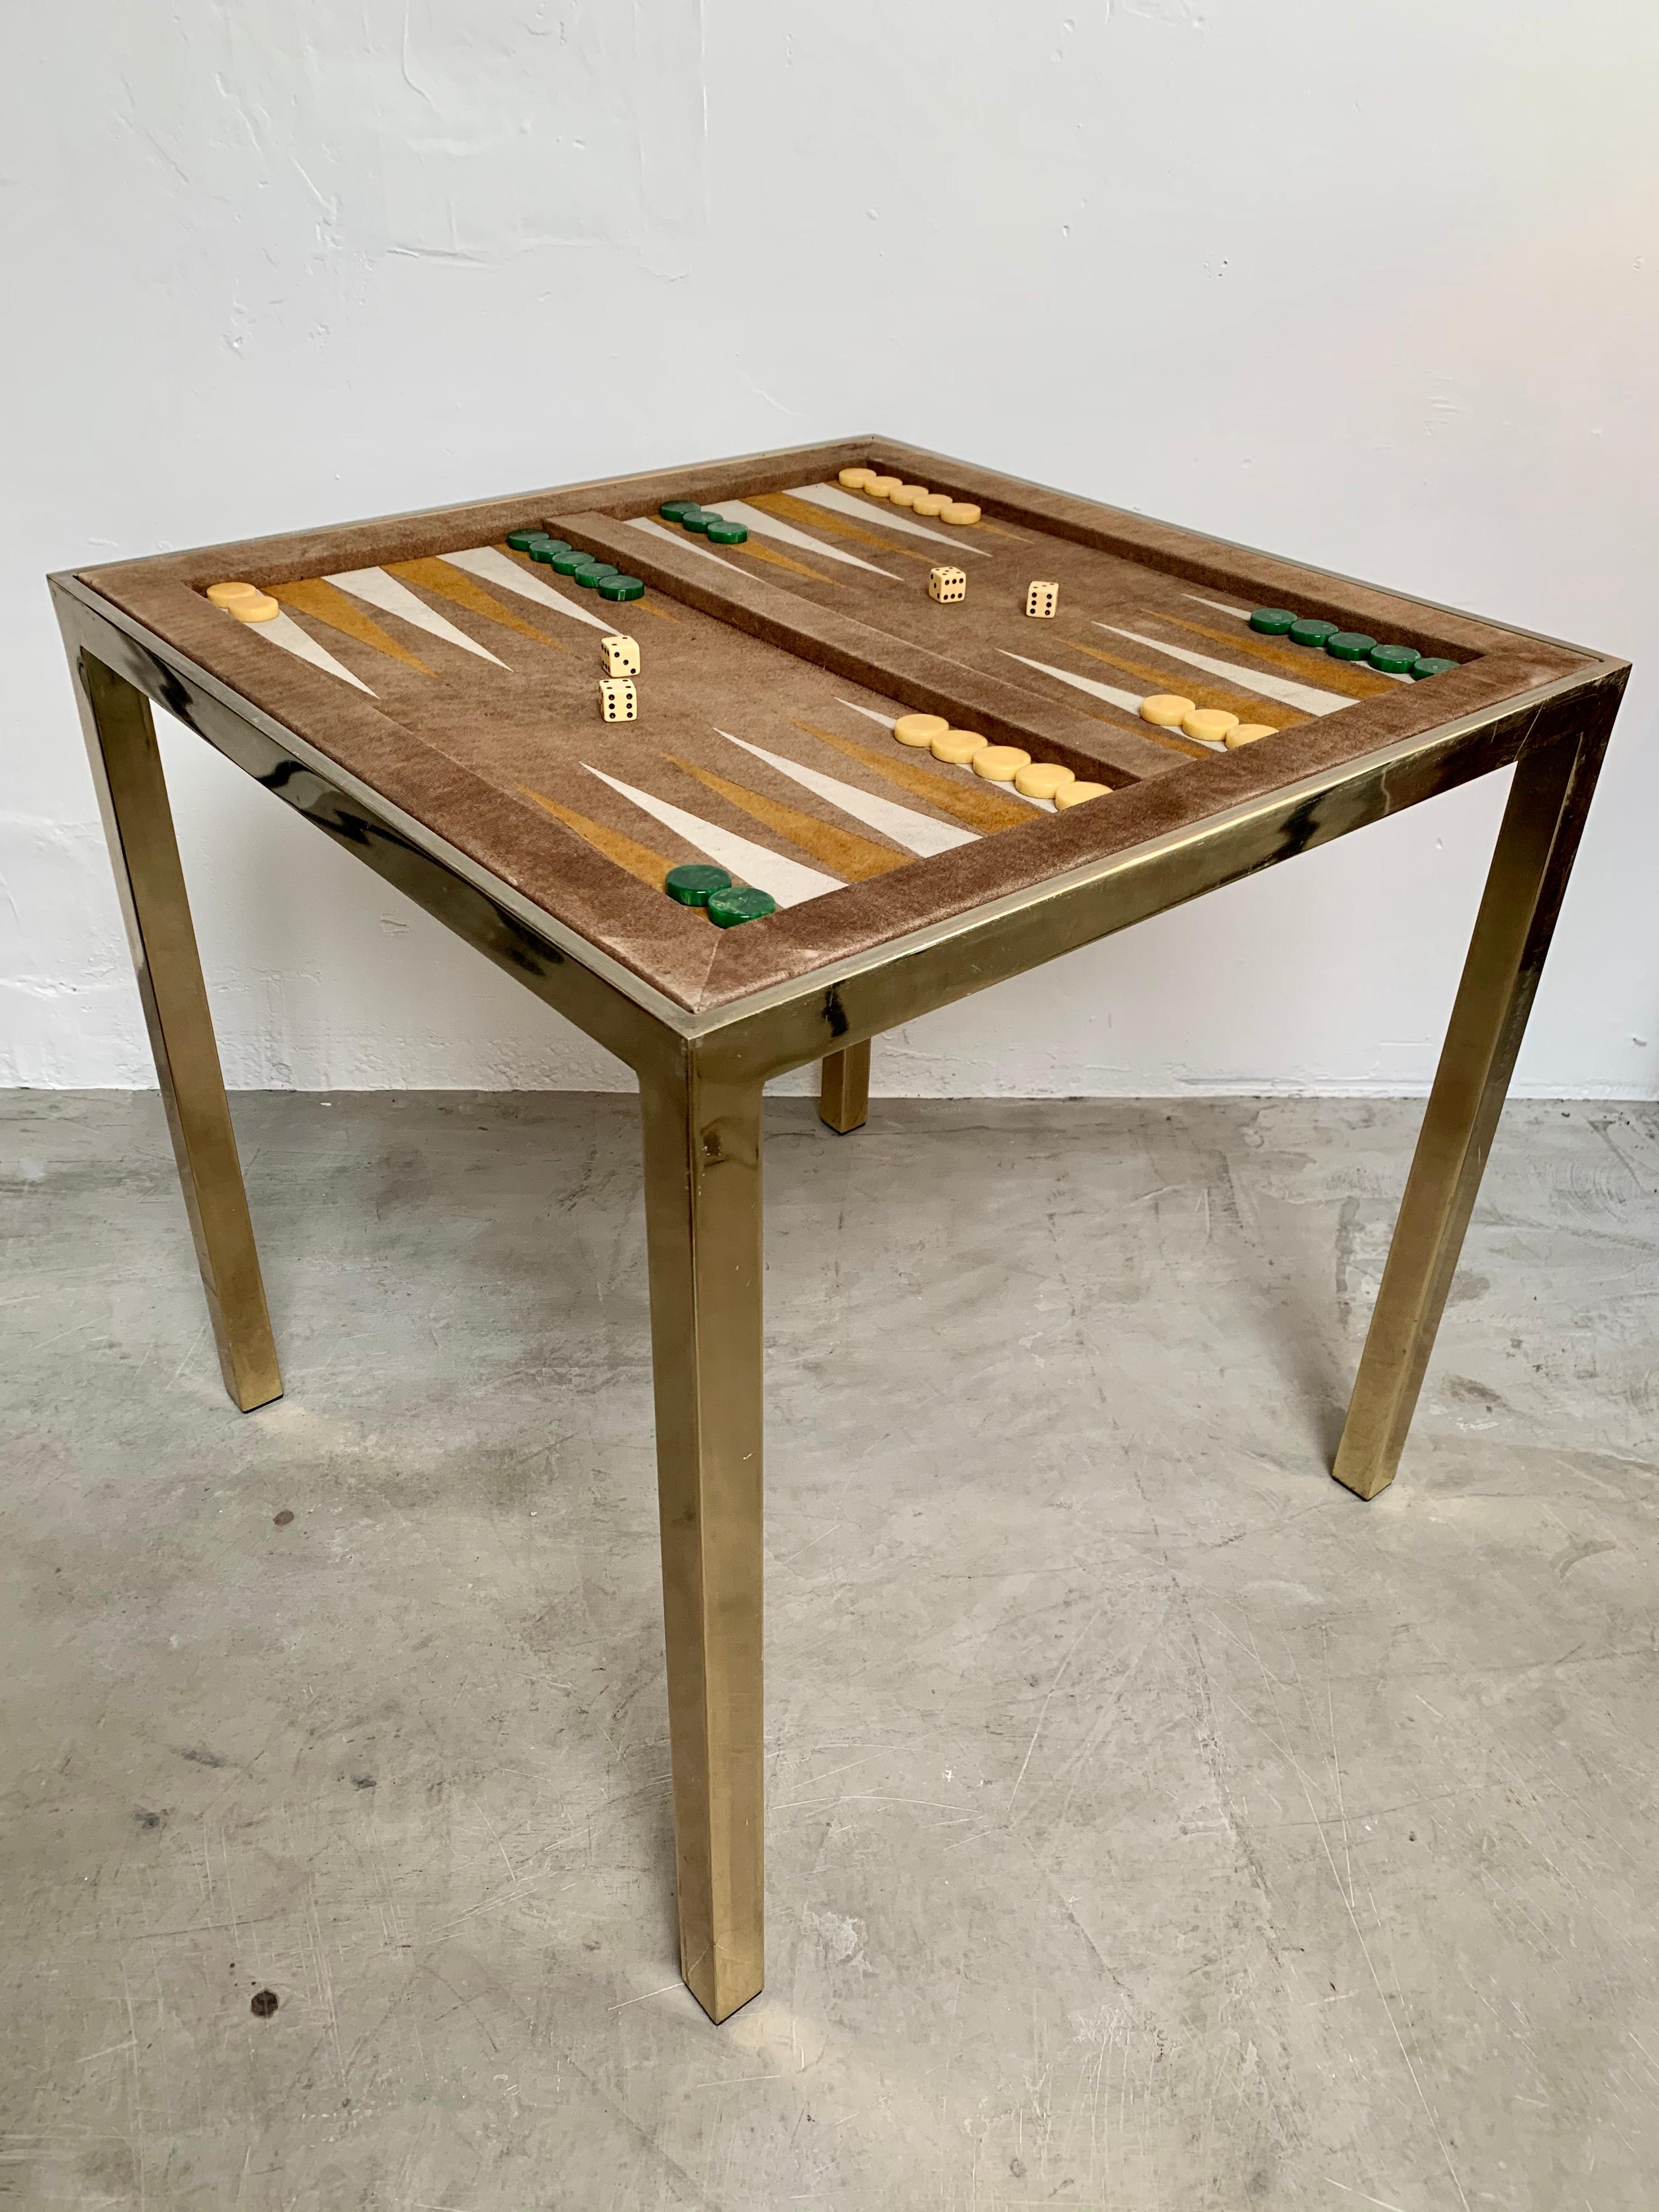 Perfectly sized vintage backgammon table by Milo Baughman. Chrome frame (with brass patina), with inset brown suede backgammon board. Board flips over to suede chess board. Vintage bakelite game pieces included along with bone dice. Glass tabletop